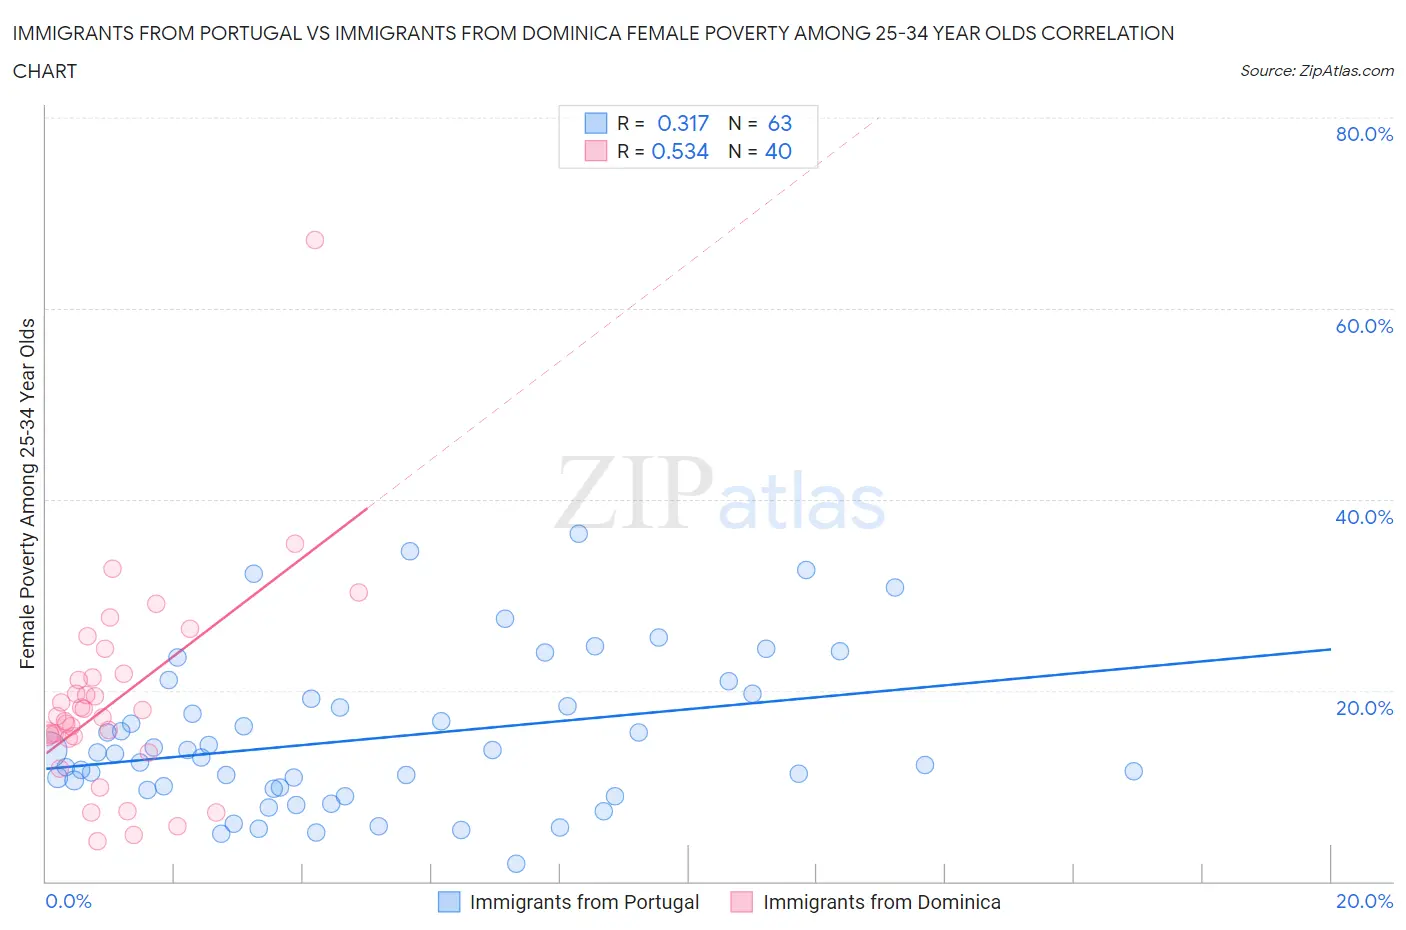 Immigrants from Portugal vs Immigrants from Dominica Female Poverty Among 25-34 Year Olds